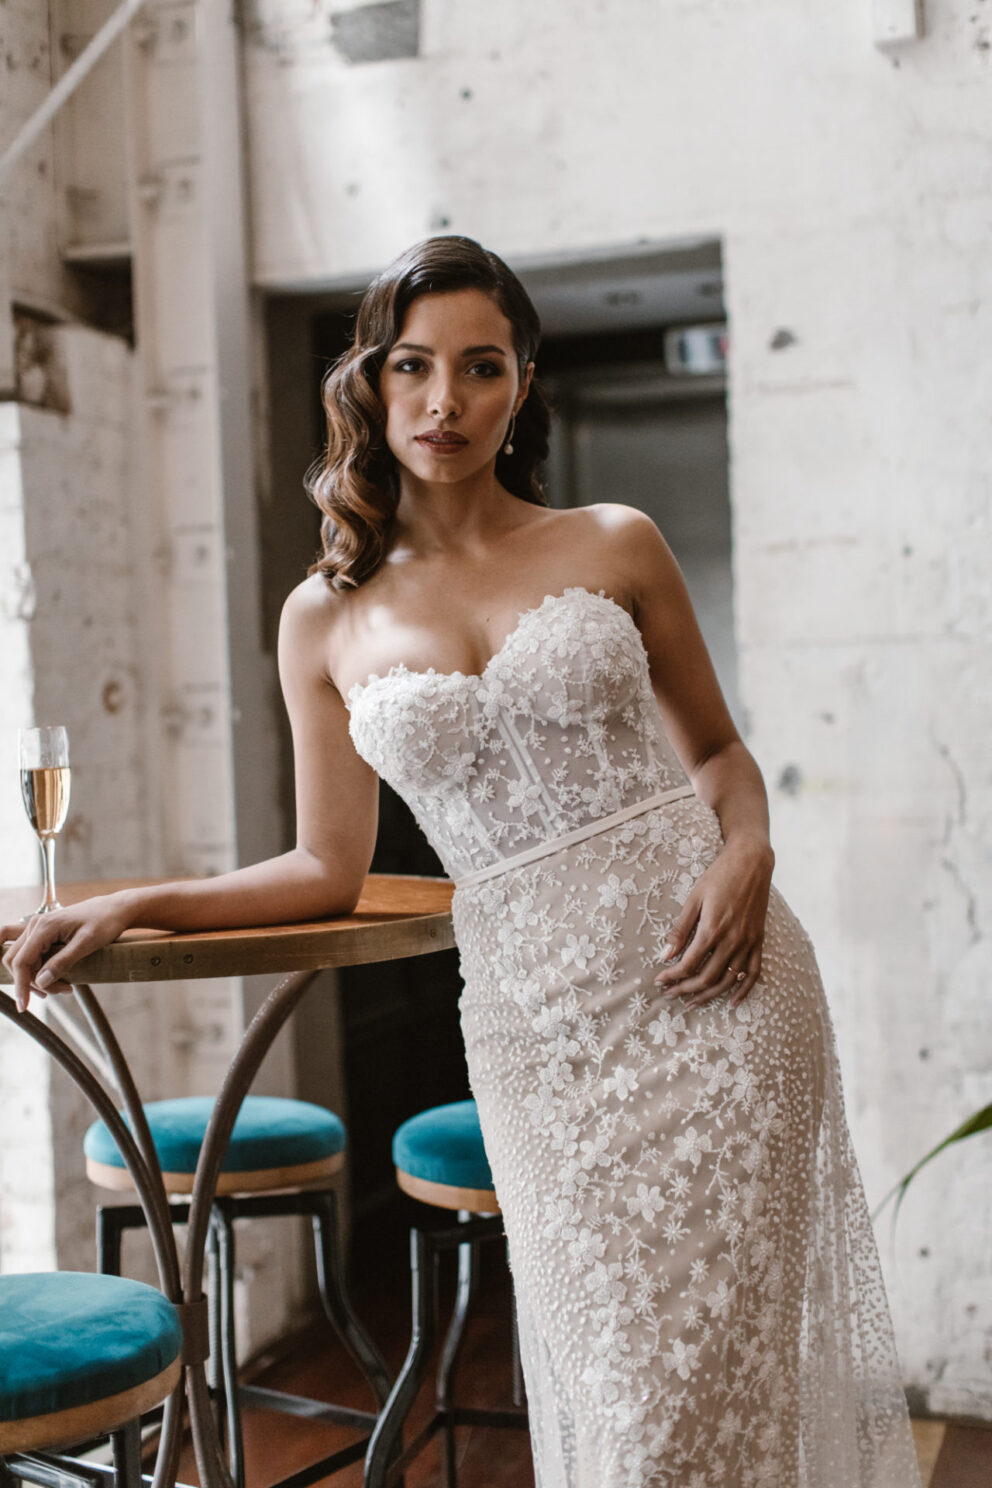 This stunning strapless champagne wedding gown is covered in hundreds of soft 3D beaded flowers, placed perfectly to create a unique pattern and silhouette.